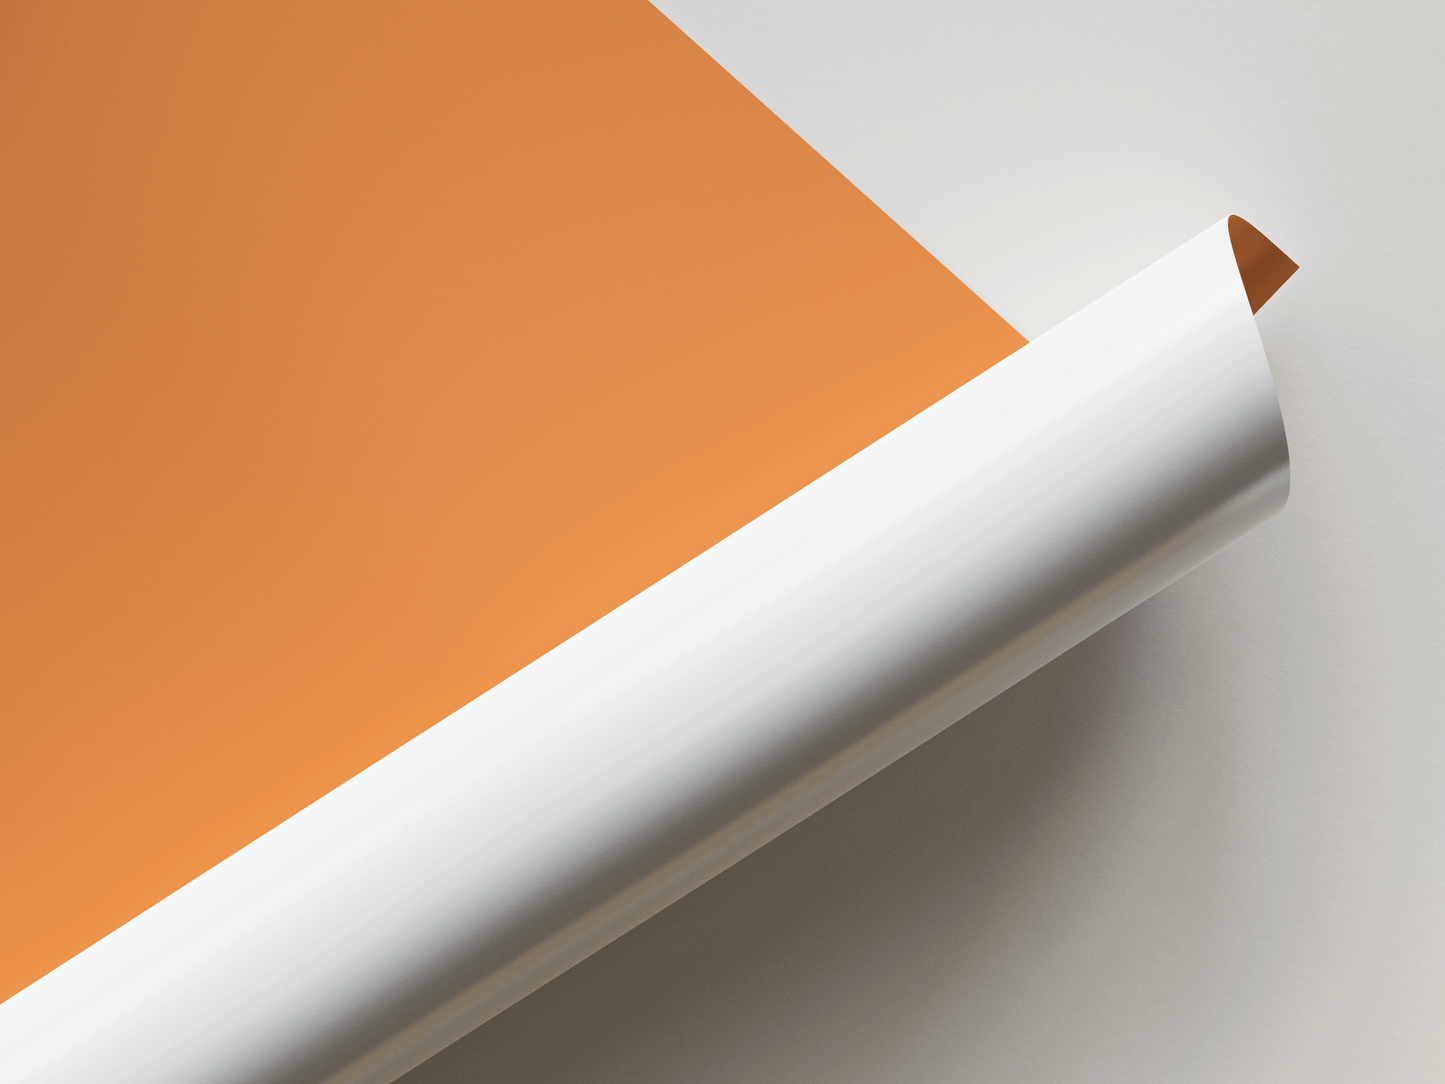 Vinyl, Waterproof Product Photography Backdrop. Orange. Australian Made. Home photoshoot and content creation.